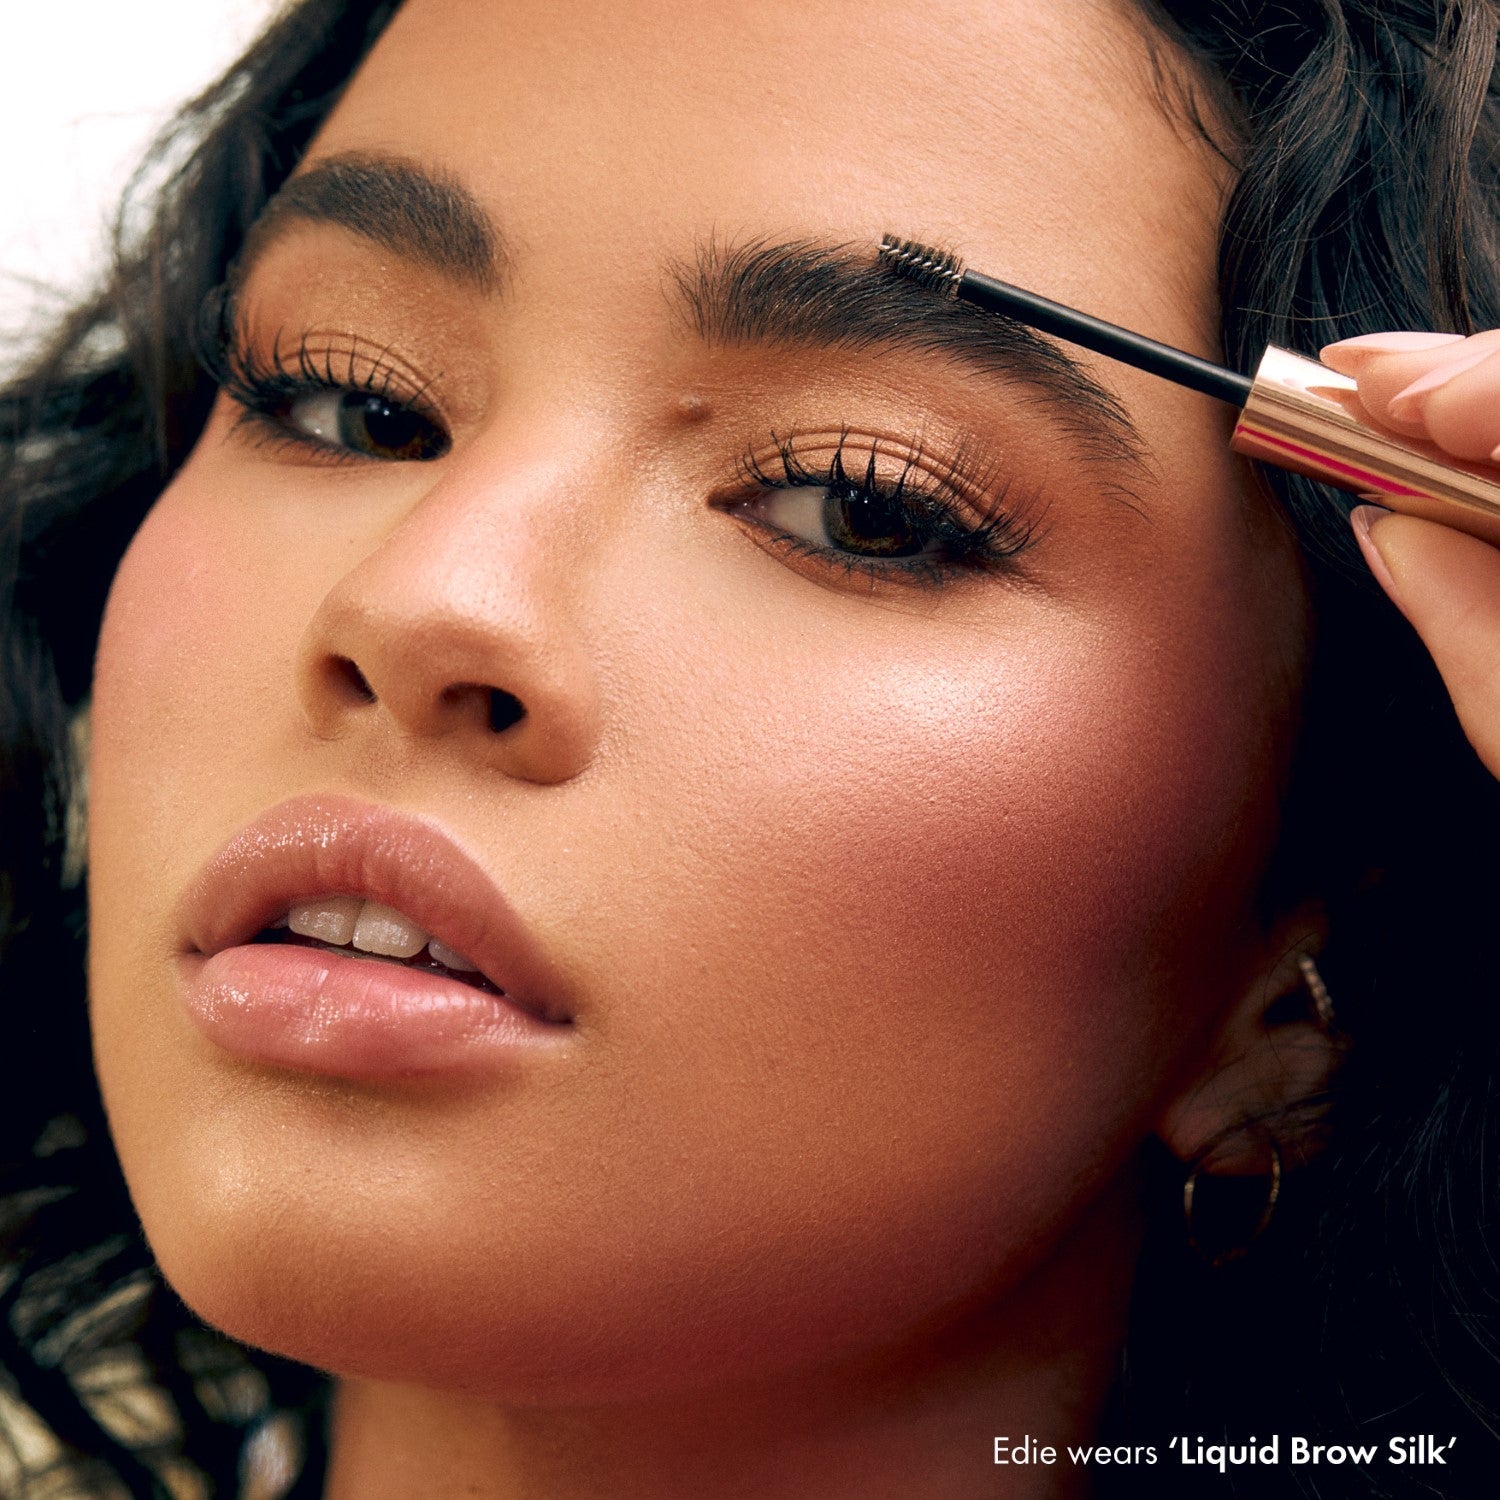 Should You Get Your Eyebrows Threaded? Here's How It Works